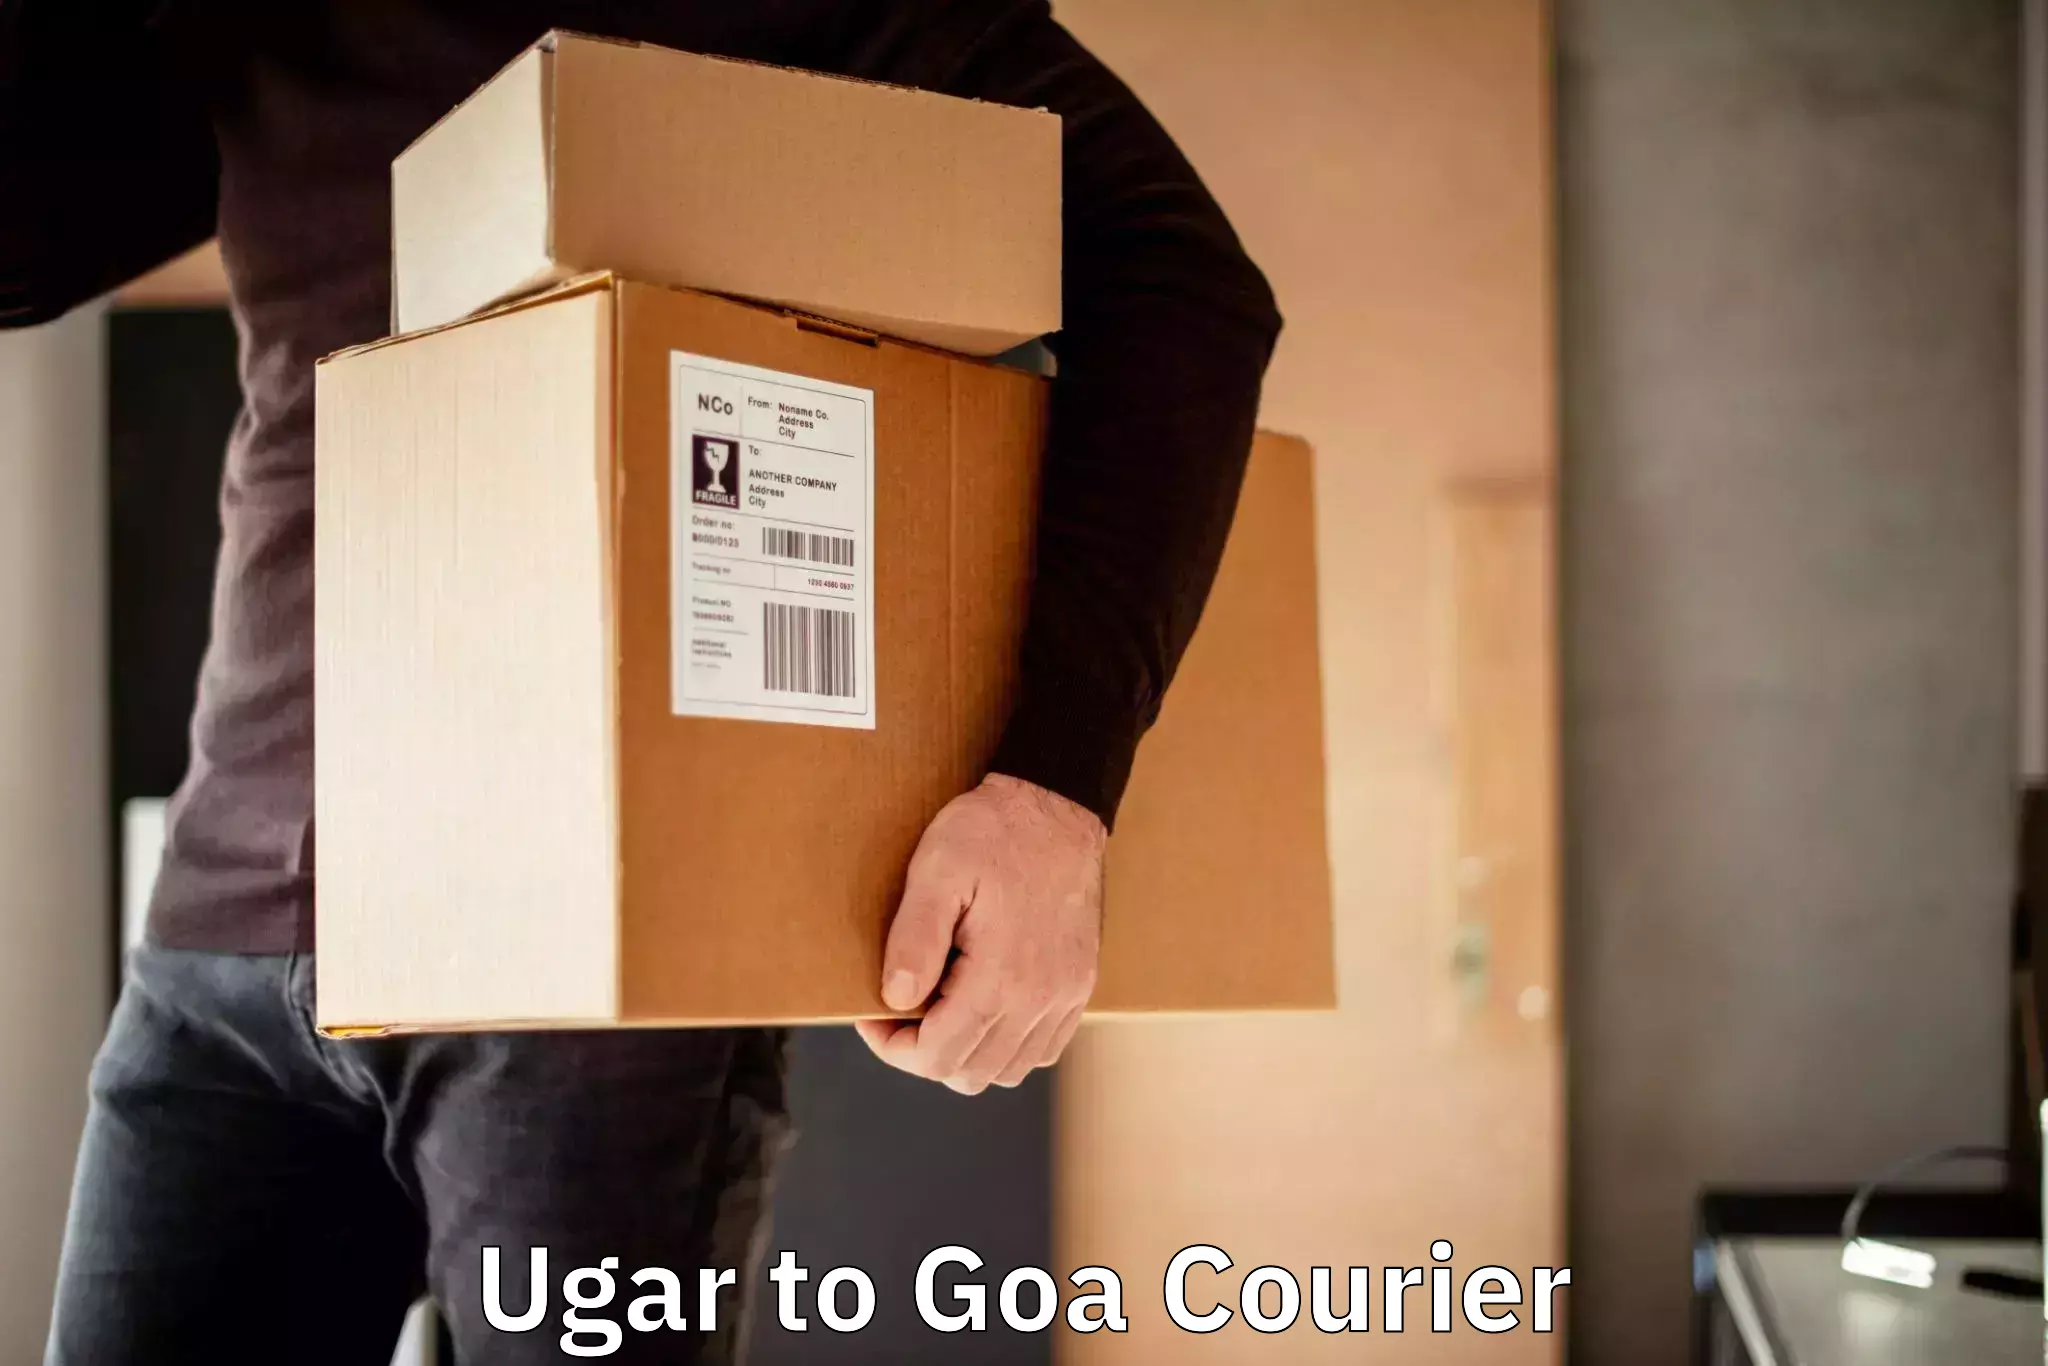 Global courier networks Ugar to Goa